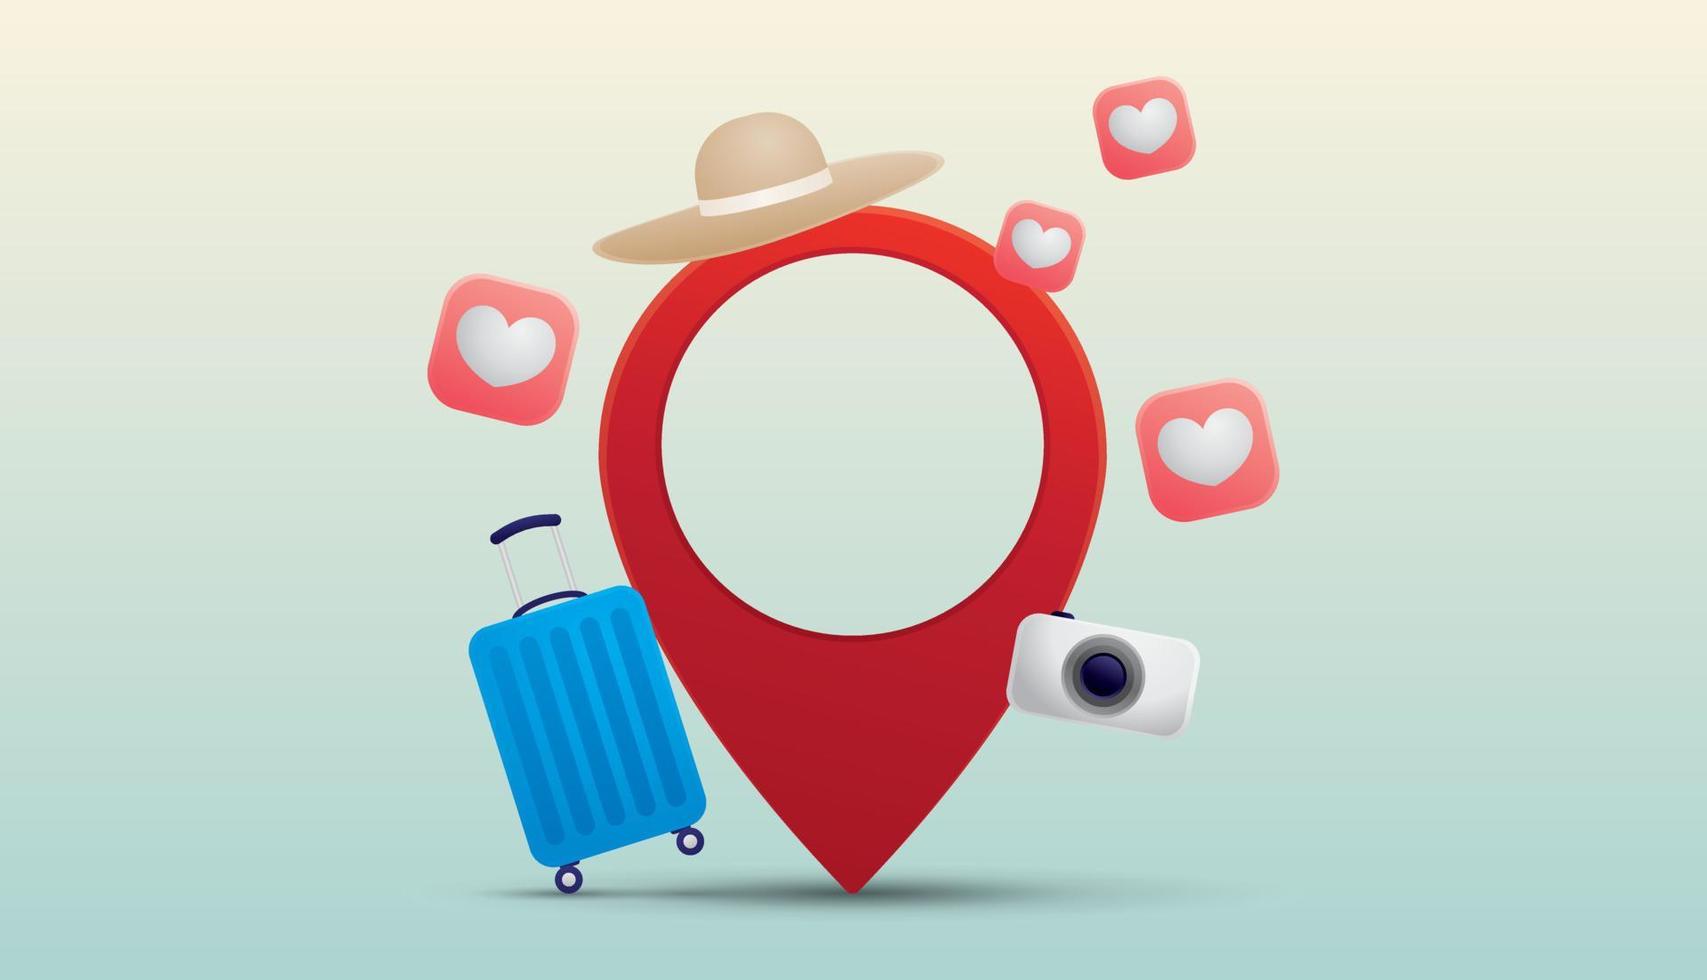 location symbol with travelling graphic elements illustration vector